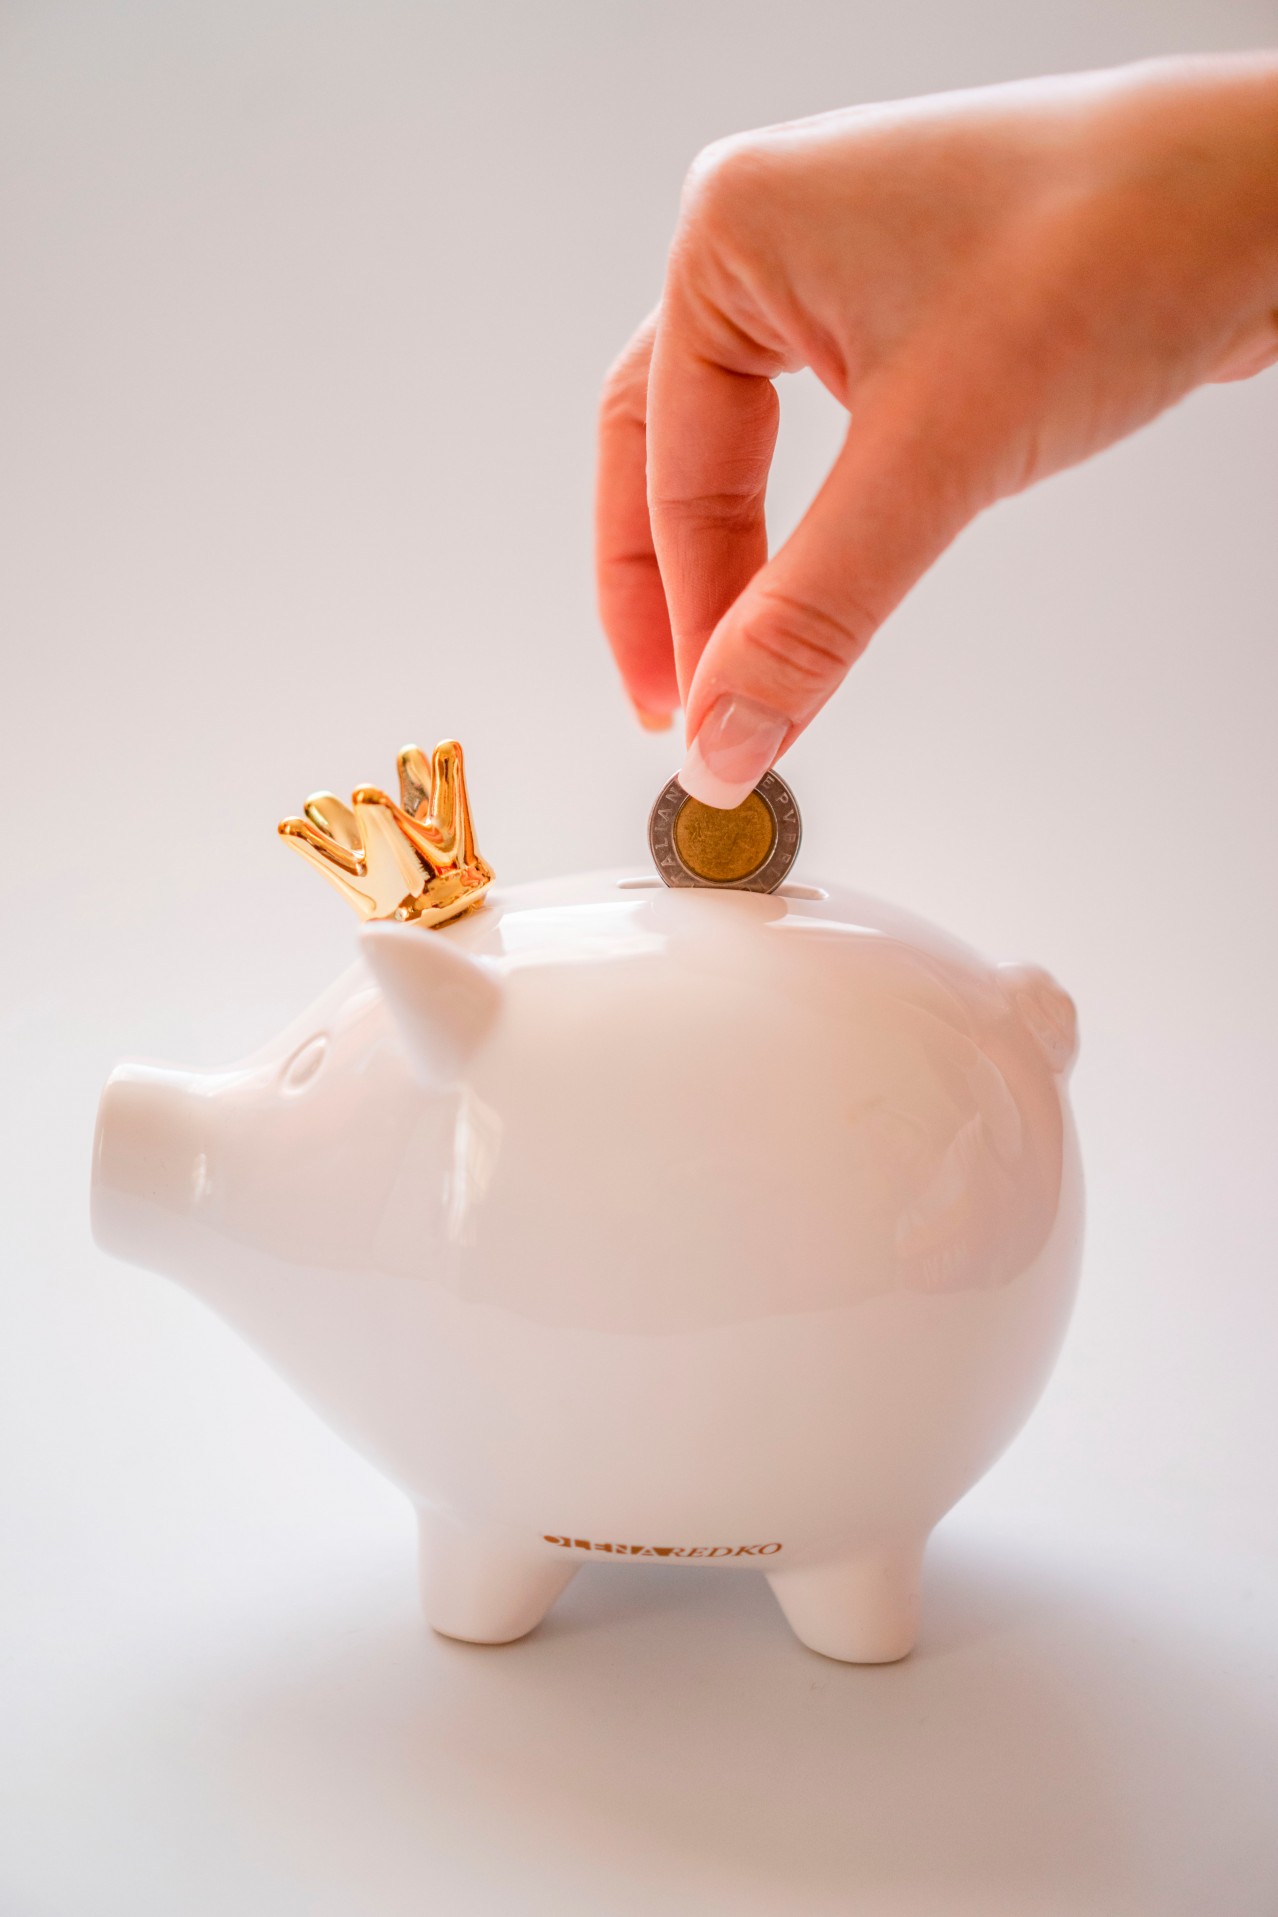 Woman with French manicure putting coin in the piggybank